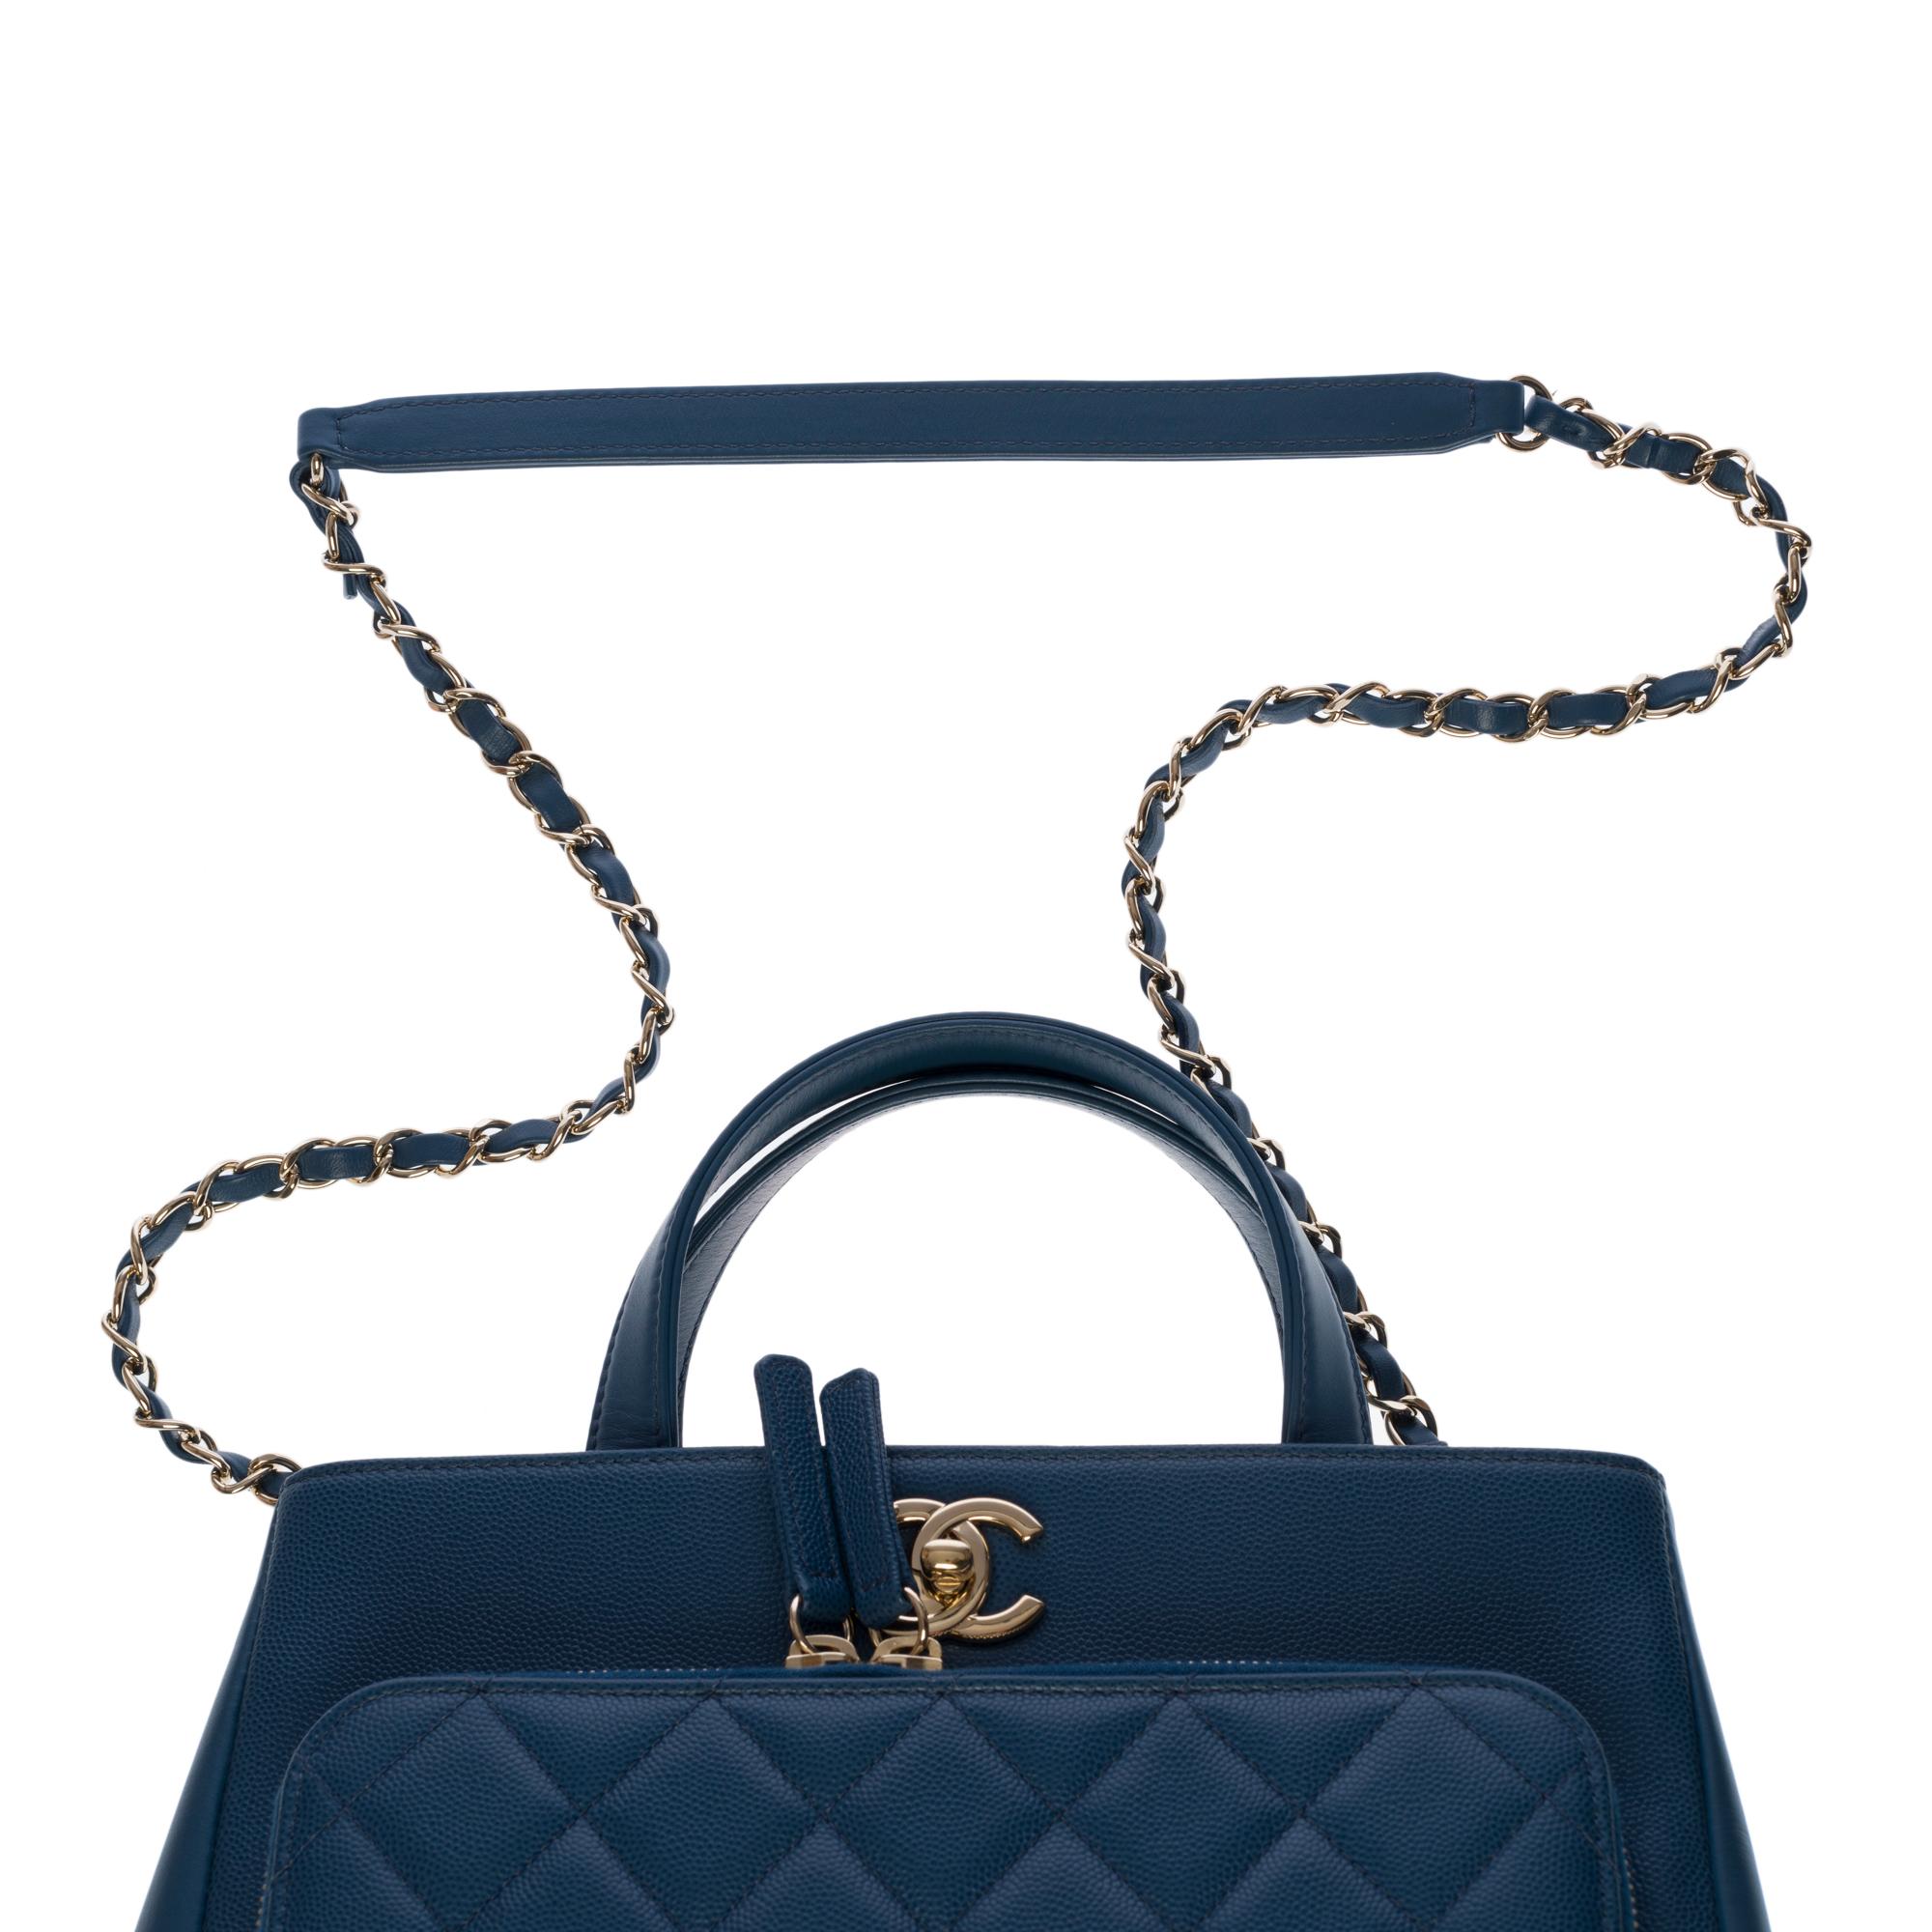 Chanel Business Affinity Tote bag in blue caviar quilted leather, GHW 3